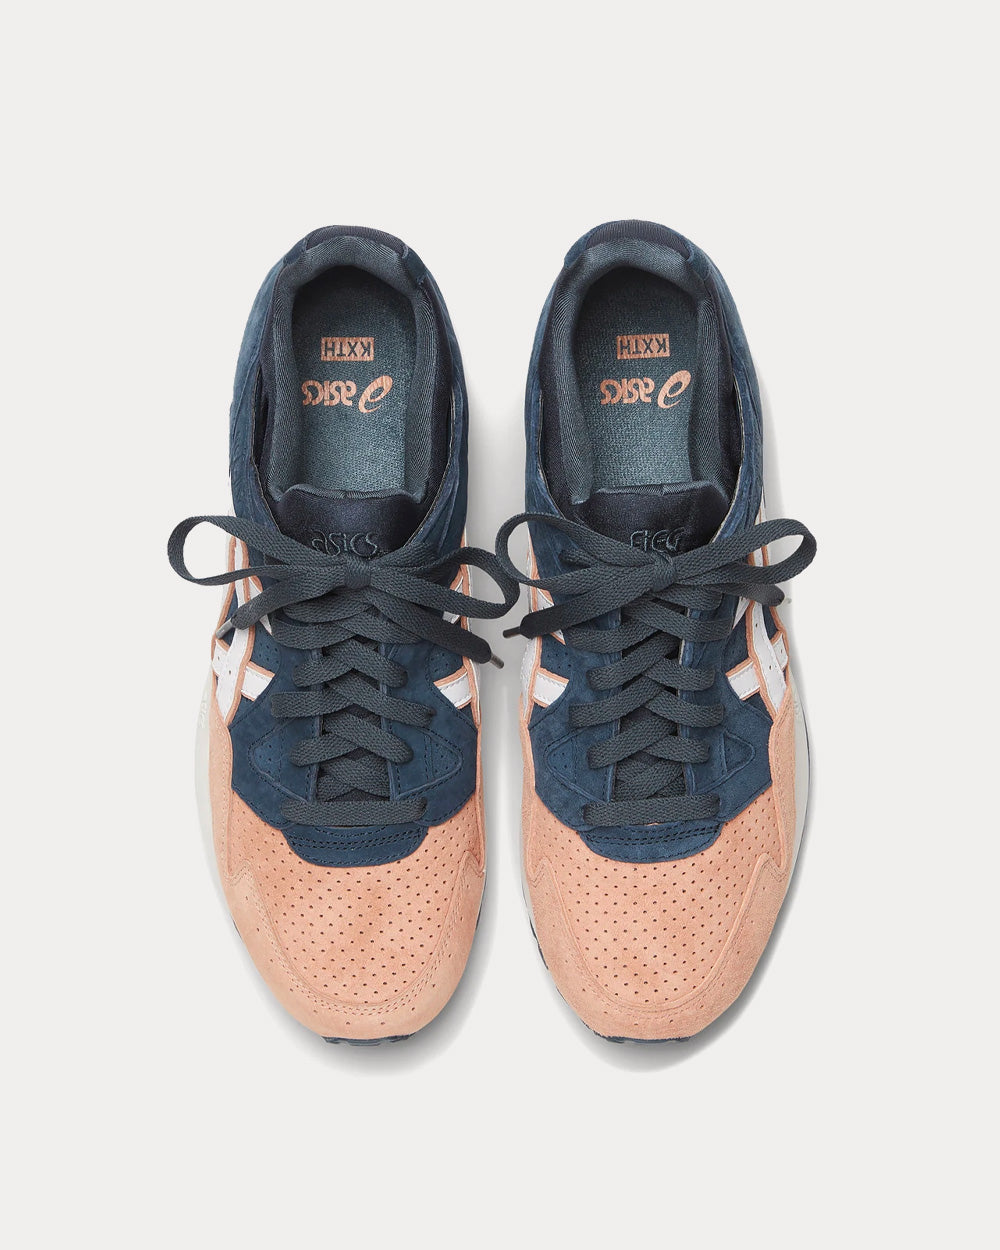 Asics x Kith - Gel-Lyte V Salmon Toe Low Top Sneakers